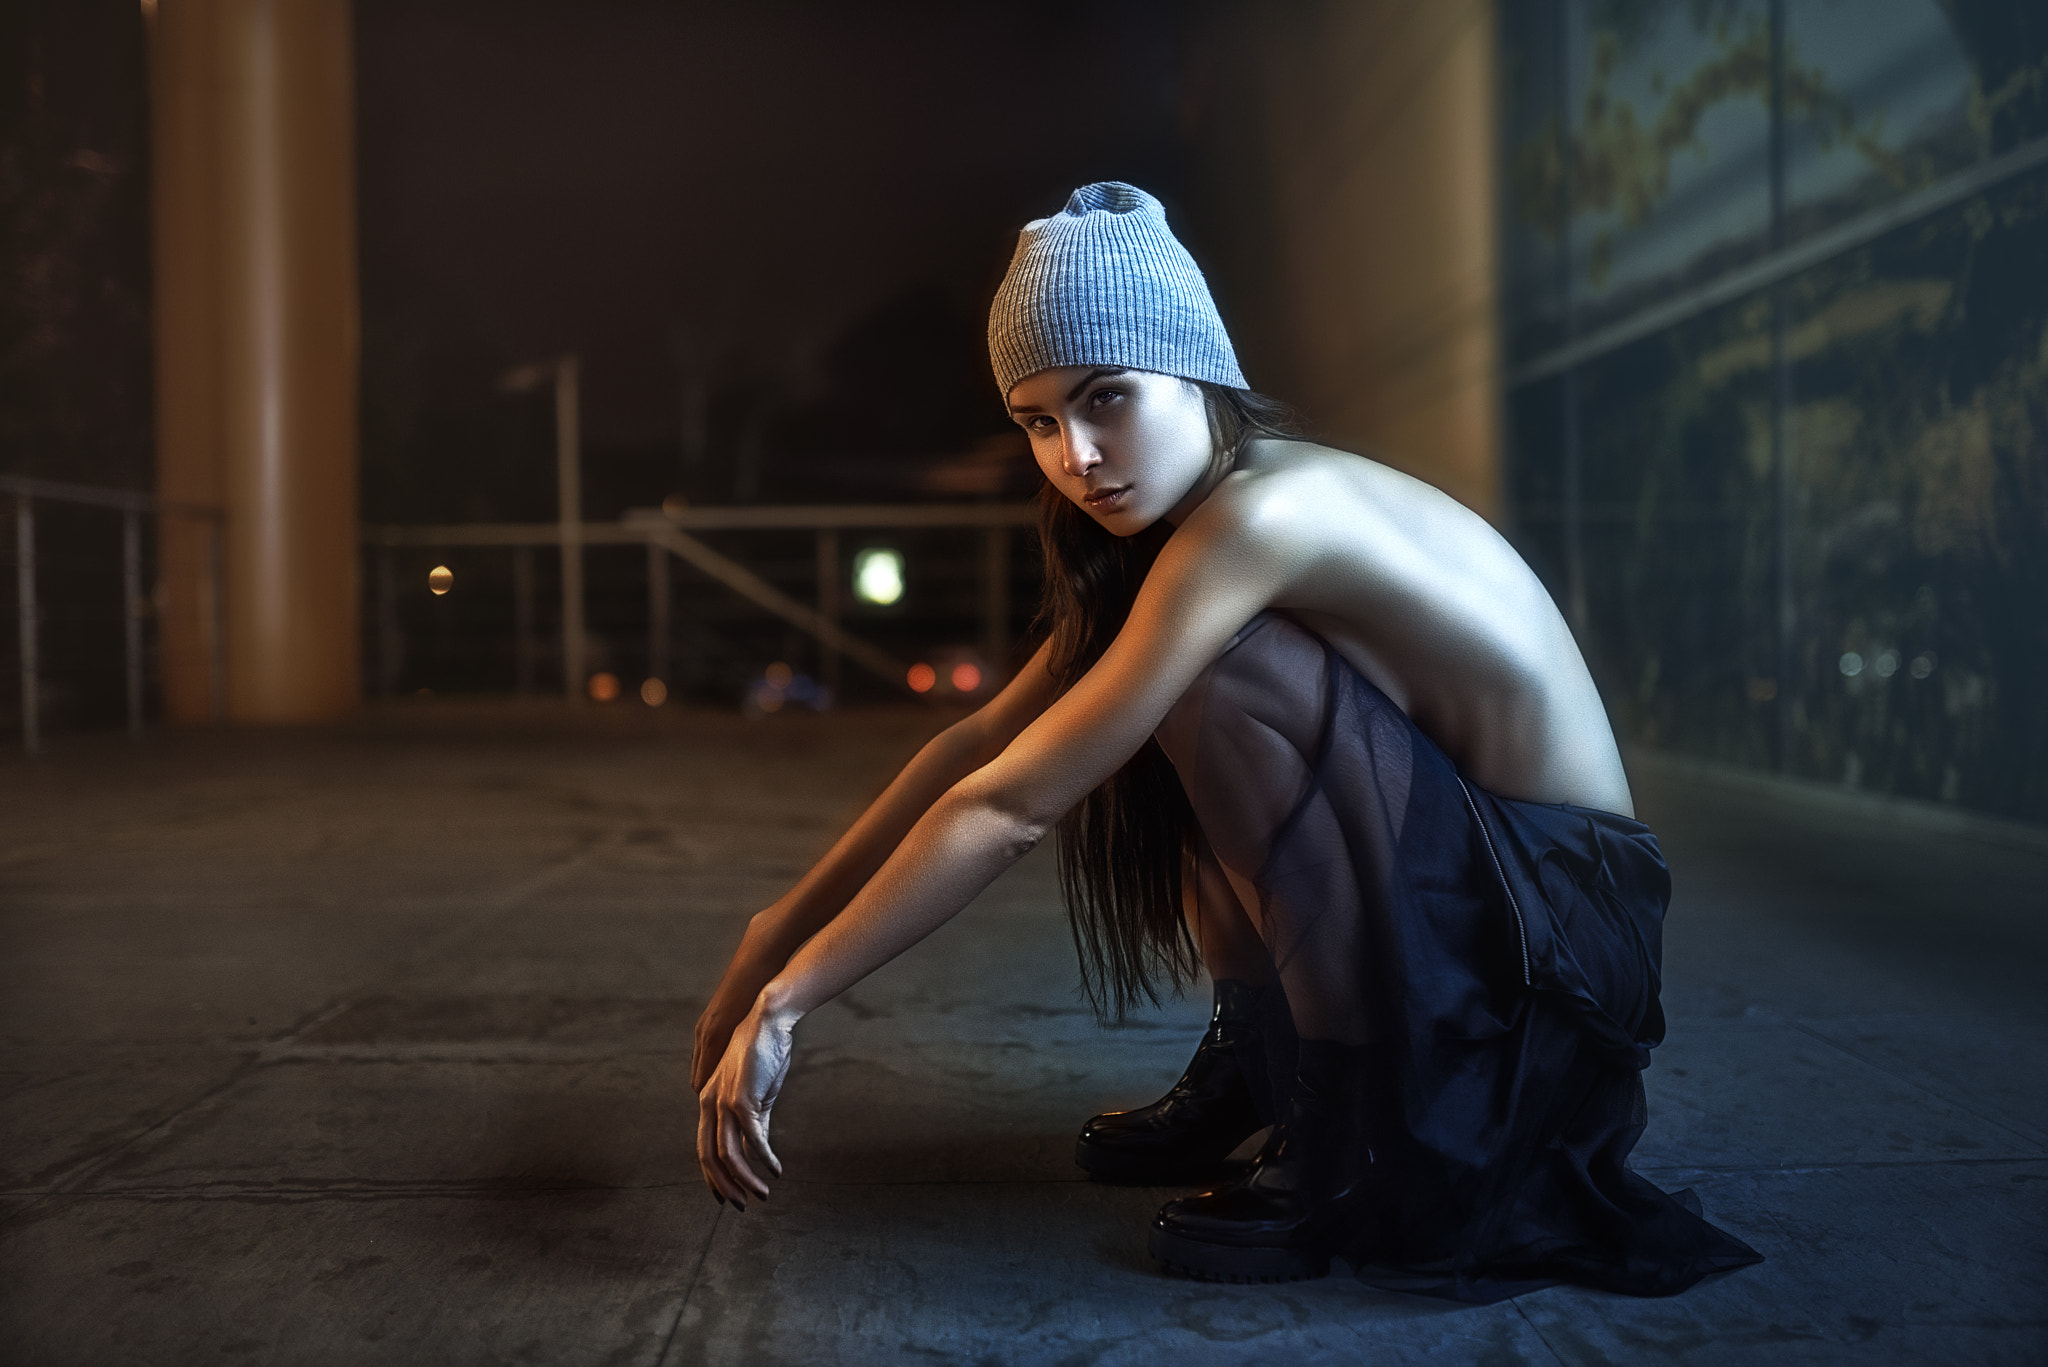 People 2048x1367 Pavel Zaytsev women 500px hat squatting topless strategic covering